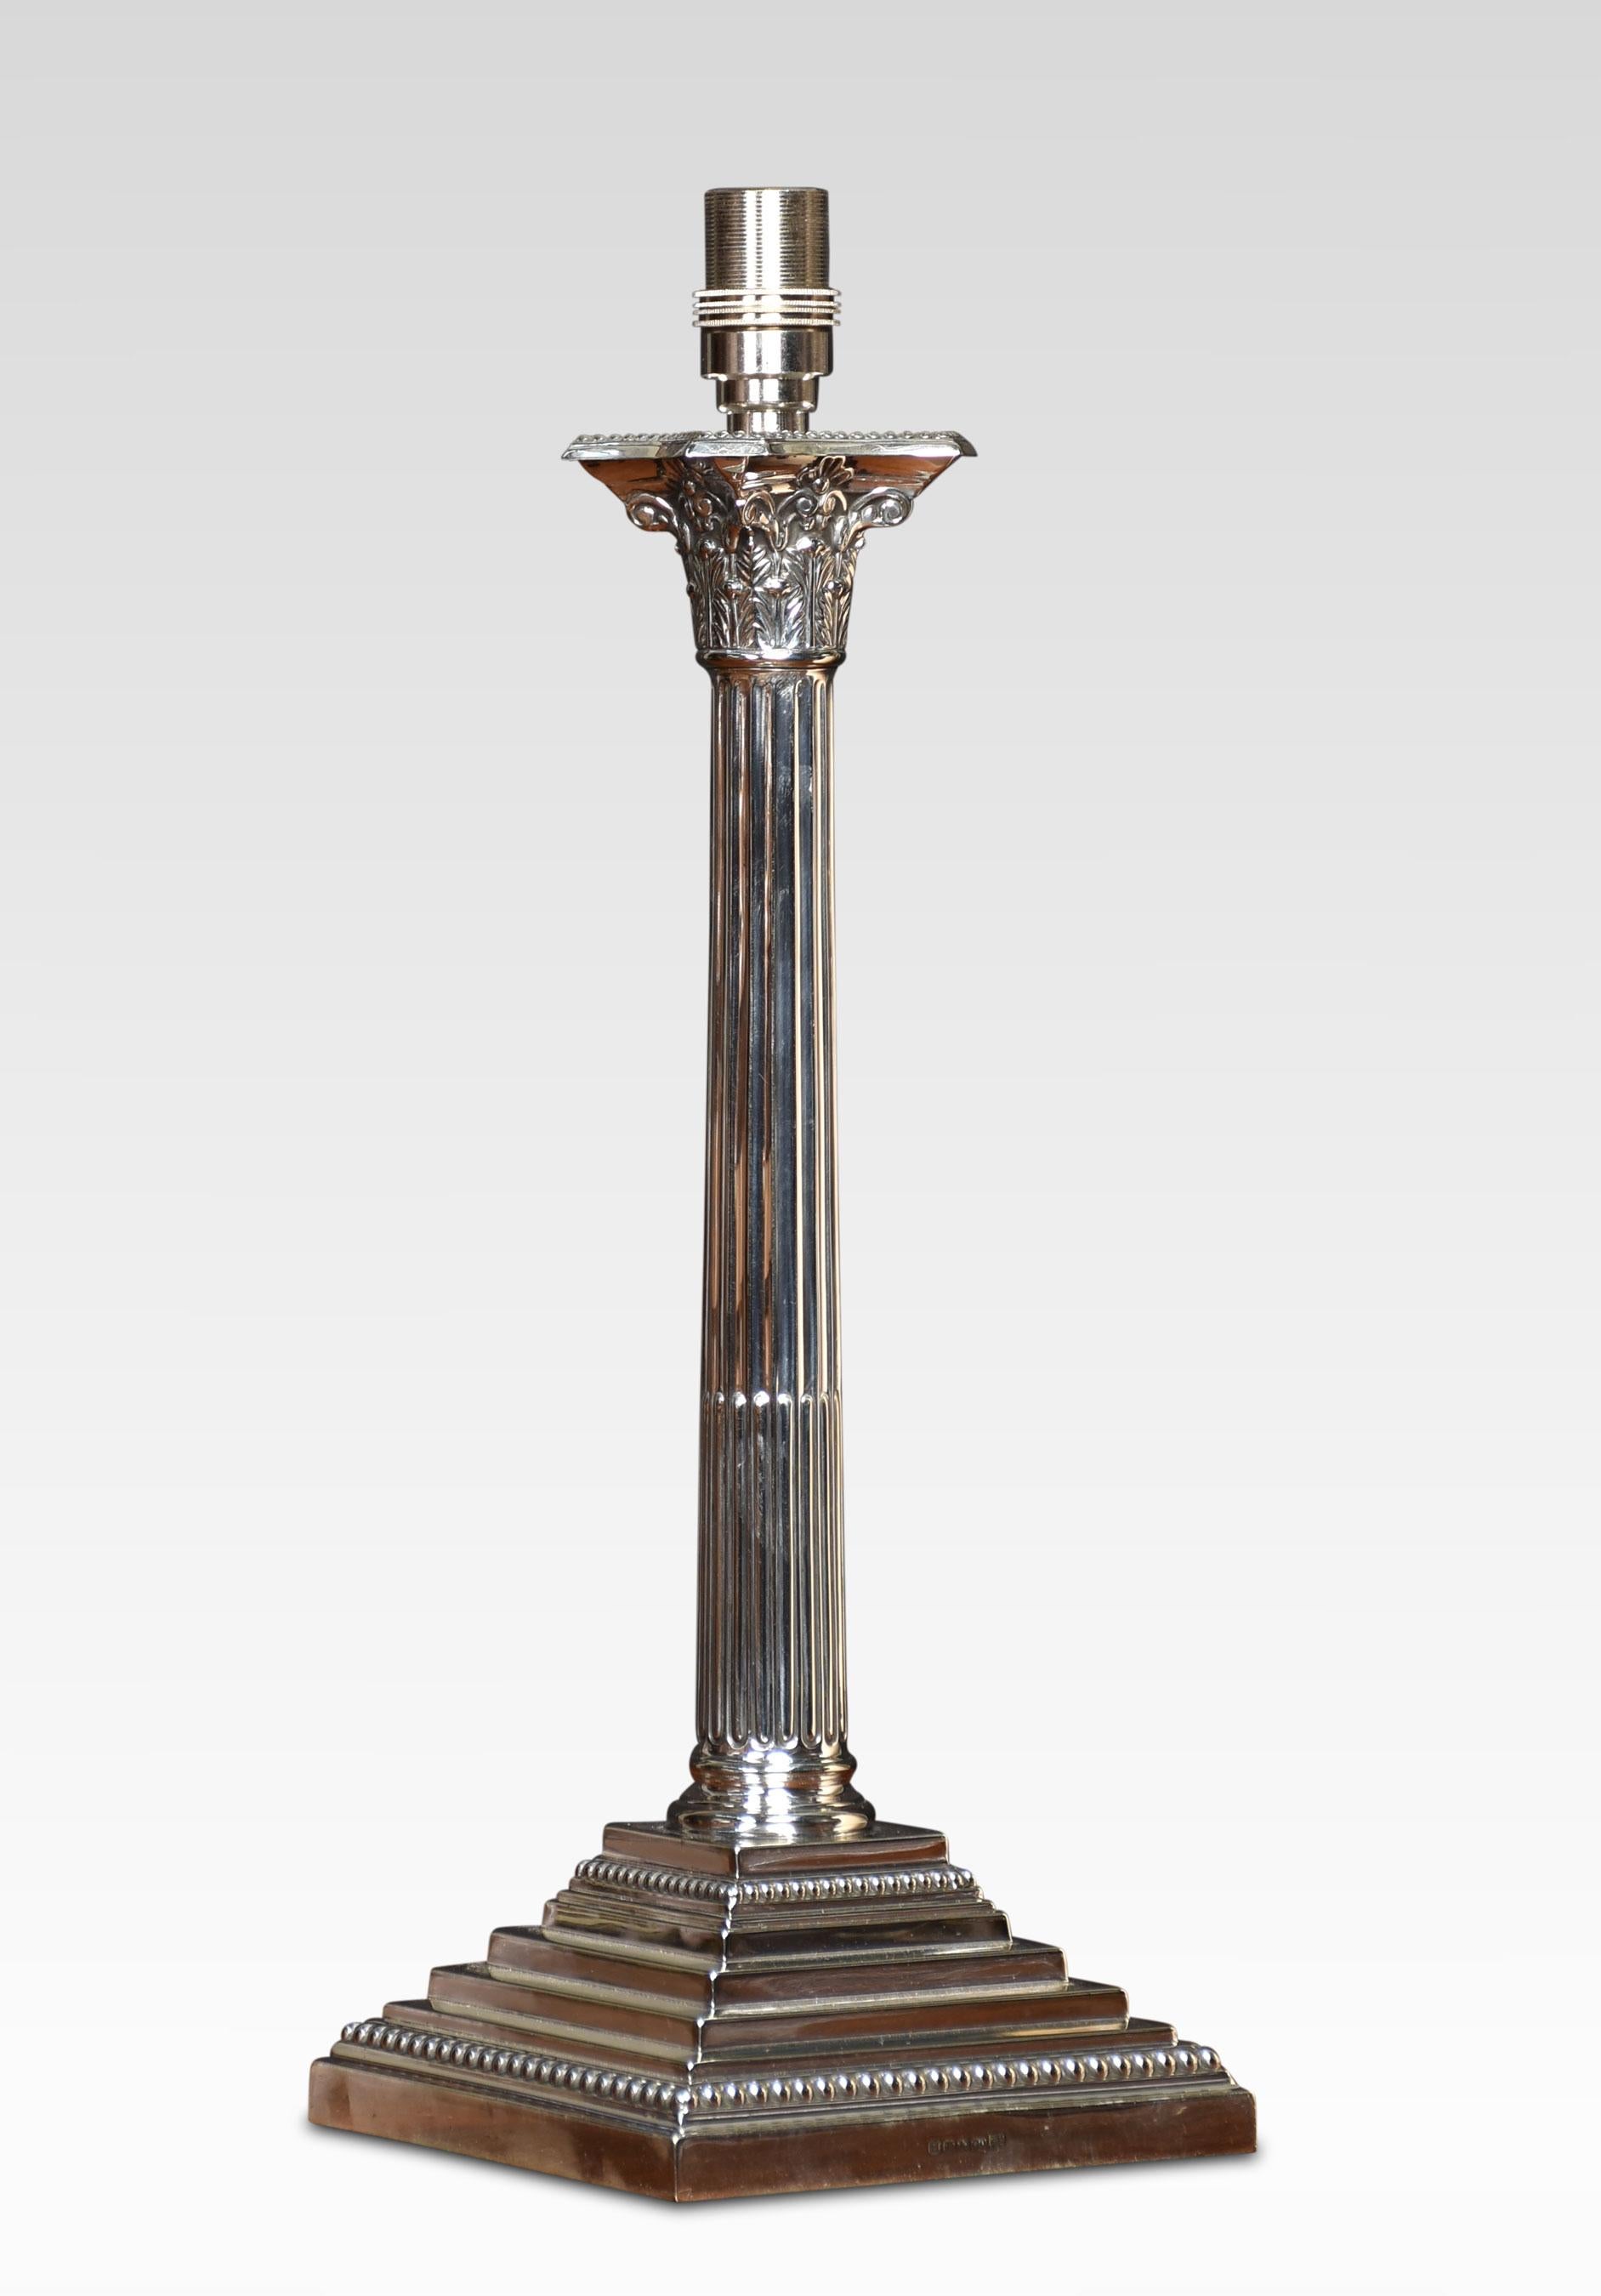 Silverplate table lamp, having a Corinthian column on square stepped base. The lamp has been rewired.
Dimensions
Height 16.5 inches
Width 6 inches
Depth 6 inches.